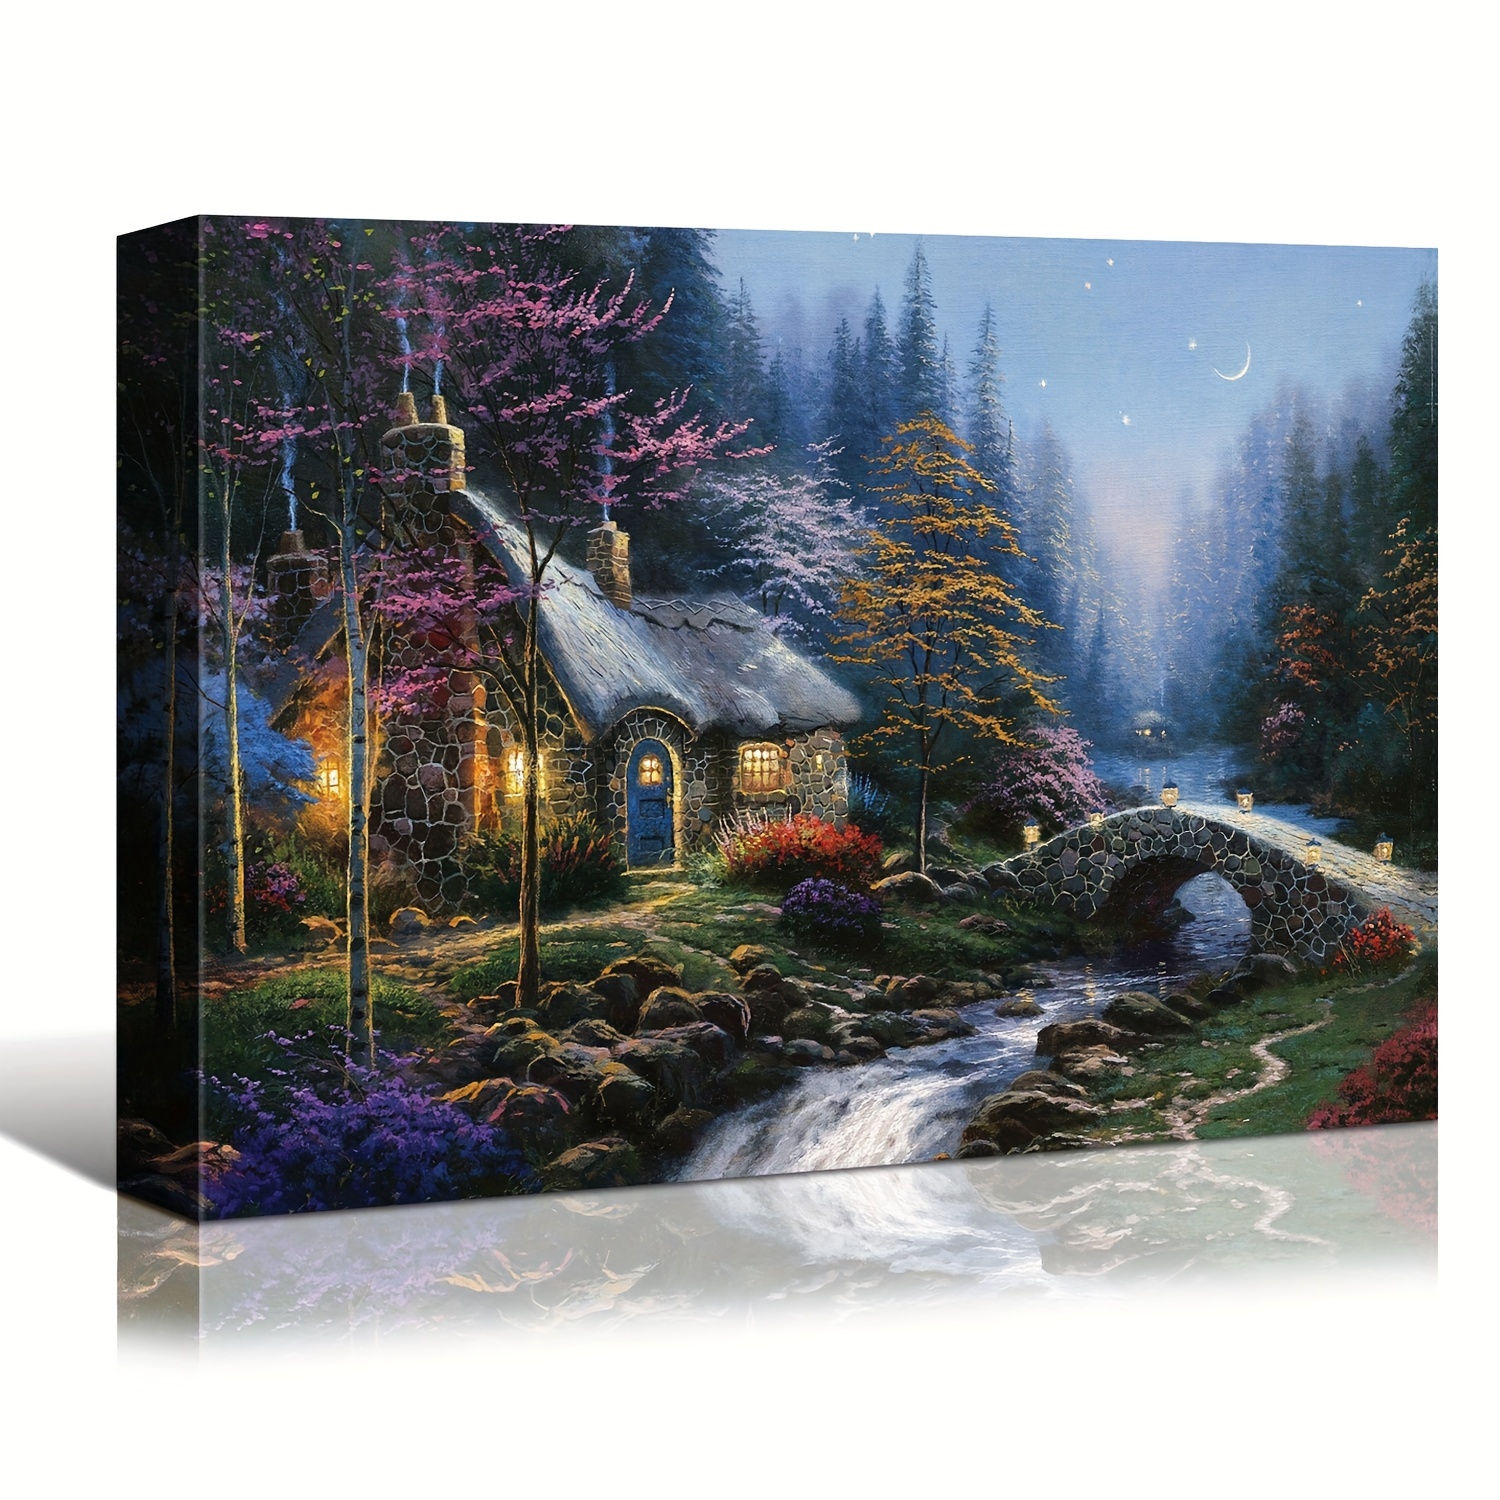 

Garden Canvas Wall Art, Landscape Oil Painting Living Room Bedroom Hanging Mural Home Office Wall Decoration (wooden Frame - Thickness 1.5inch)